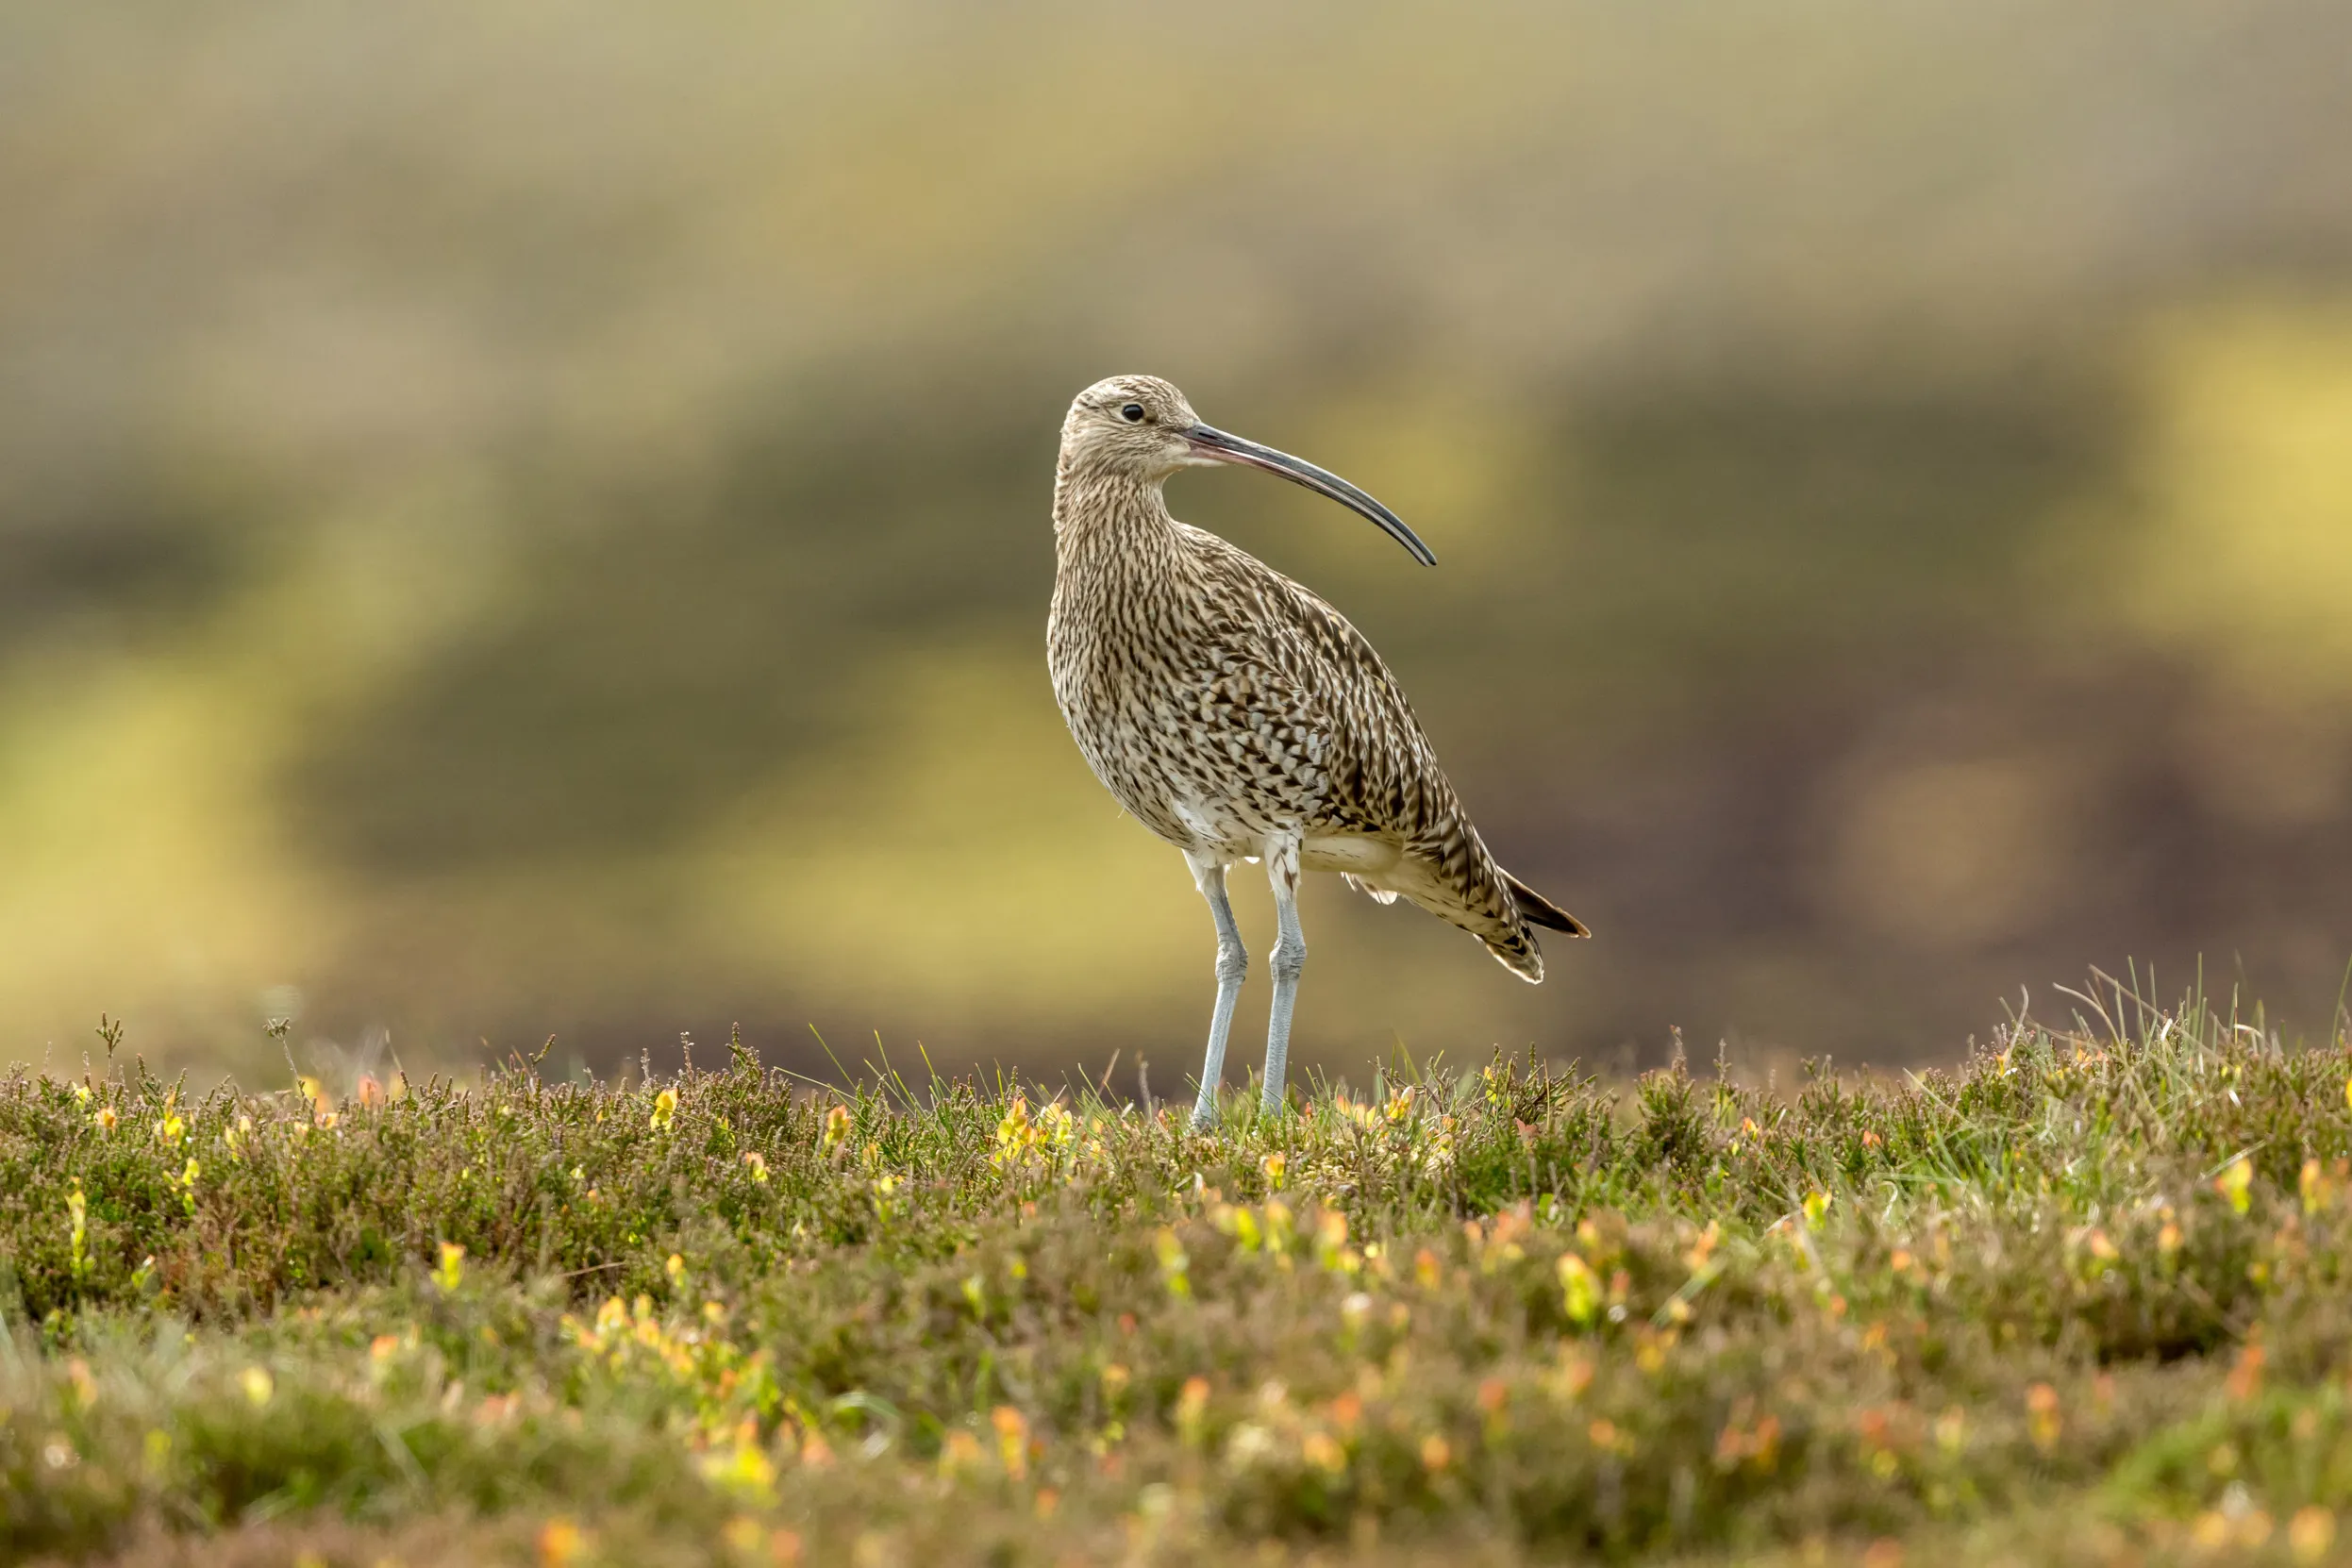 A lone Curlew stood on moorland.